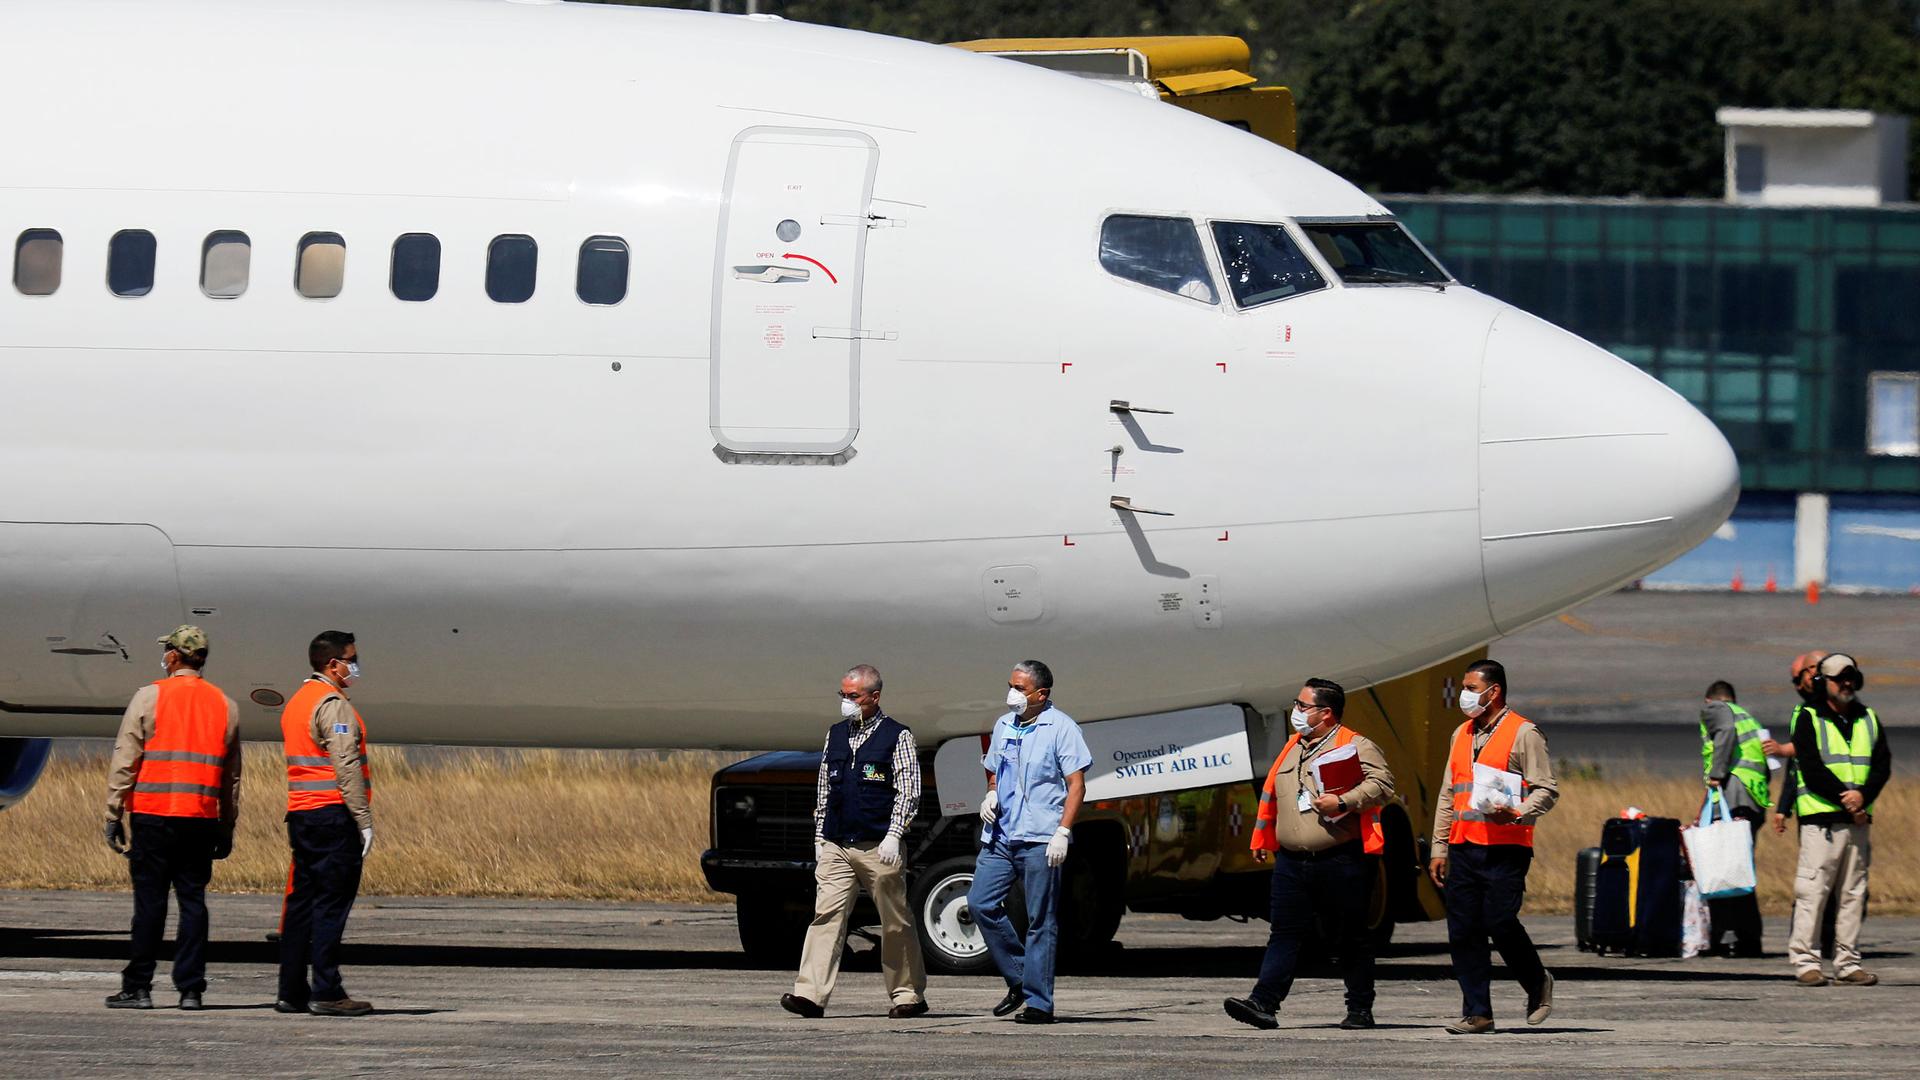 Government officials, wearing protective masks, stand next to a plane